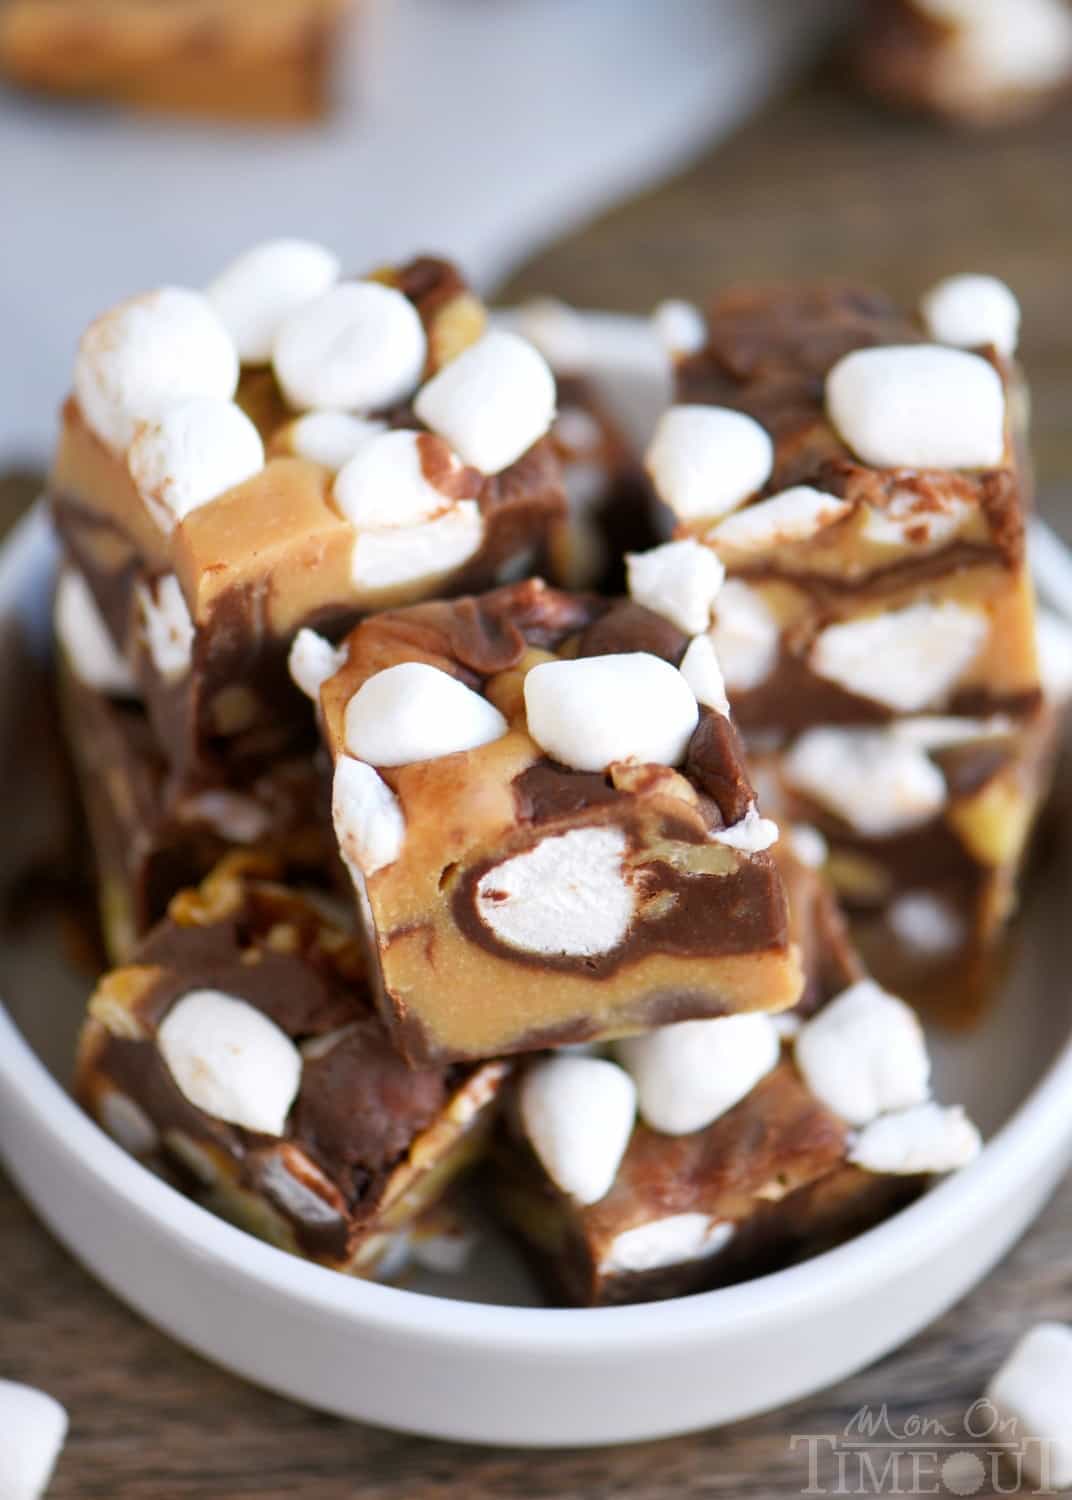 This easy, 5 Minute Peanut Butter Rocky Road Fudge is guaranteed to be a hit with the peanut butter lovers in your life! So easy to make and no candy thermometer needed! Great for the holidays and makes a lovely gift too! // Mom On Timeout